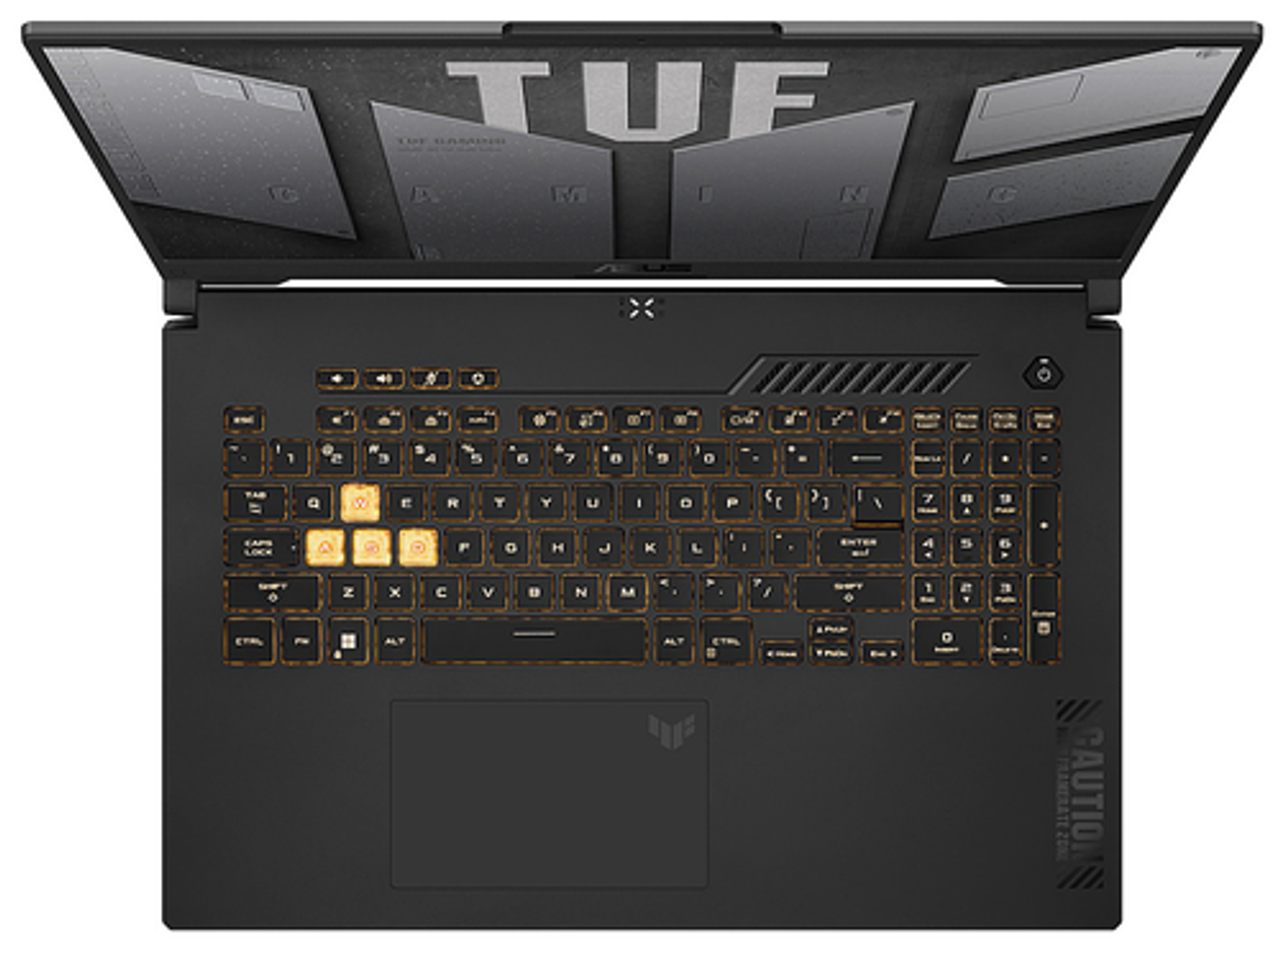 ASUS - TUF Gaming F17 17.3" 144Hz Gaming Laptop FHD - Intel Core i7-13700H with 16GB Memory - NVIDIA GeForce RTX 4060 - 1TB SSD - Mecha Gray